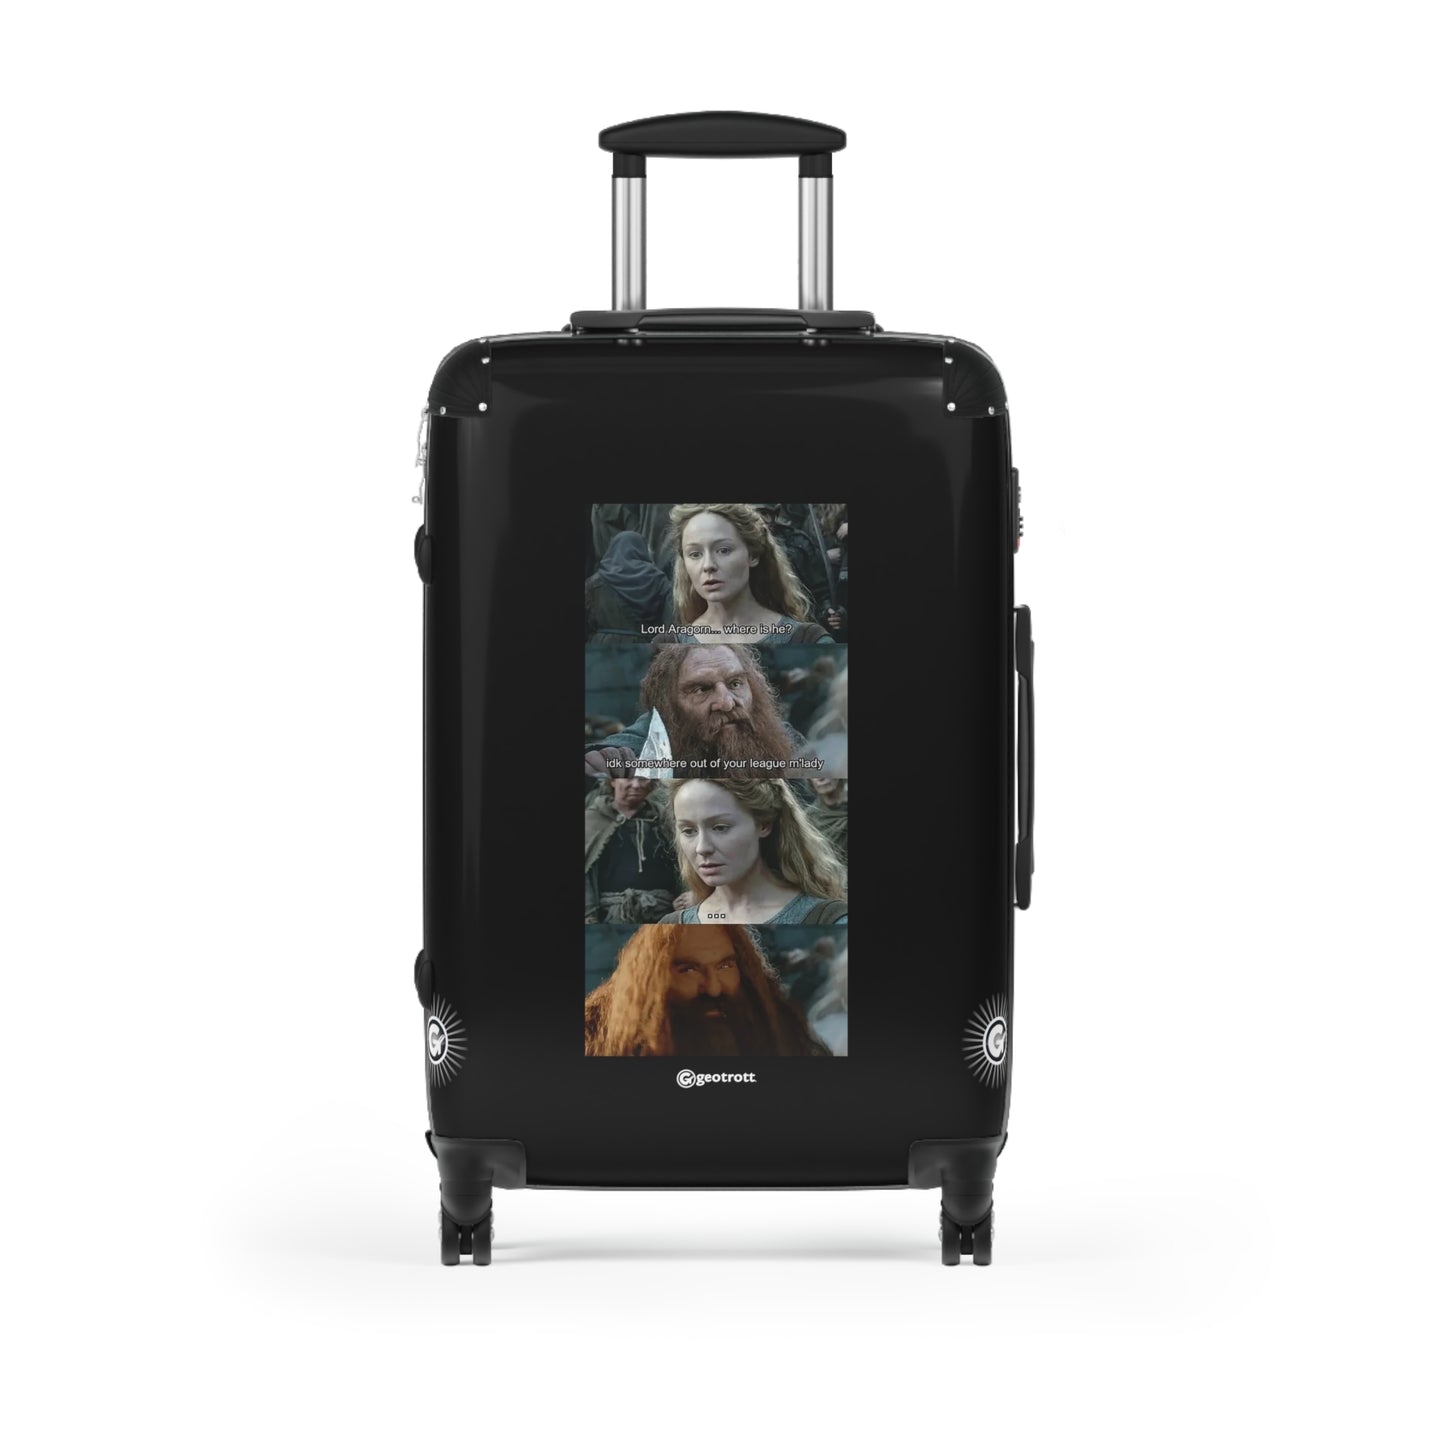 Glóin Éowyn Flirt Joke Lord Of The Rings MEME Funny Inspirational Luggage Bag Rolling Suitcase Travel Accessories